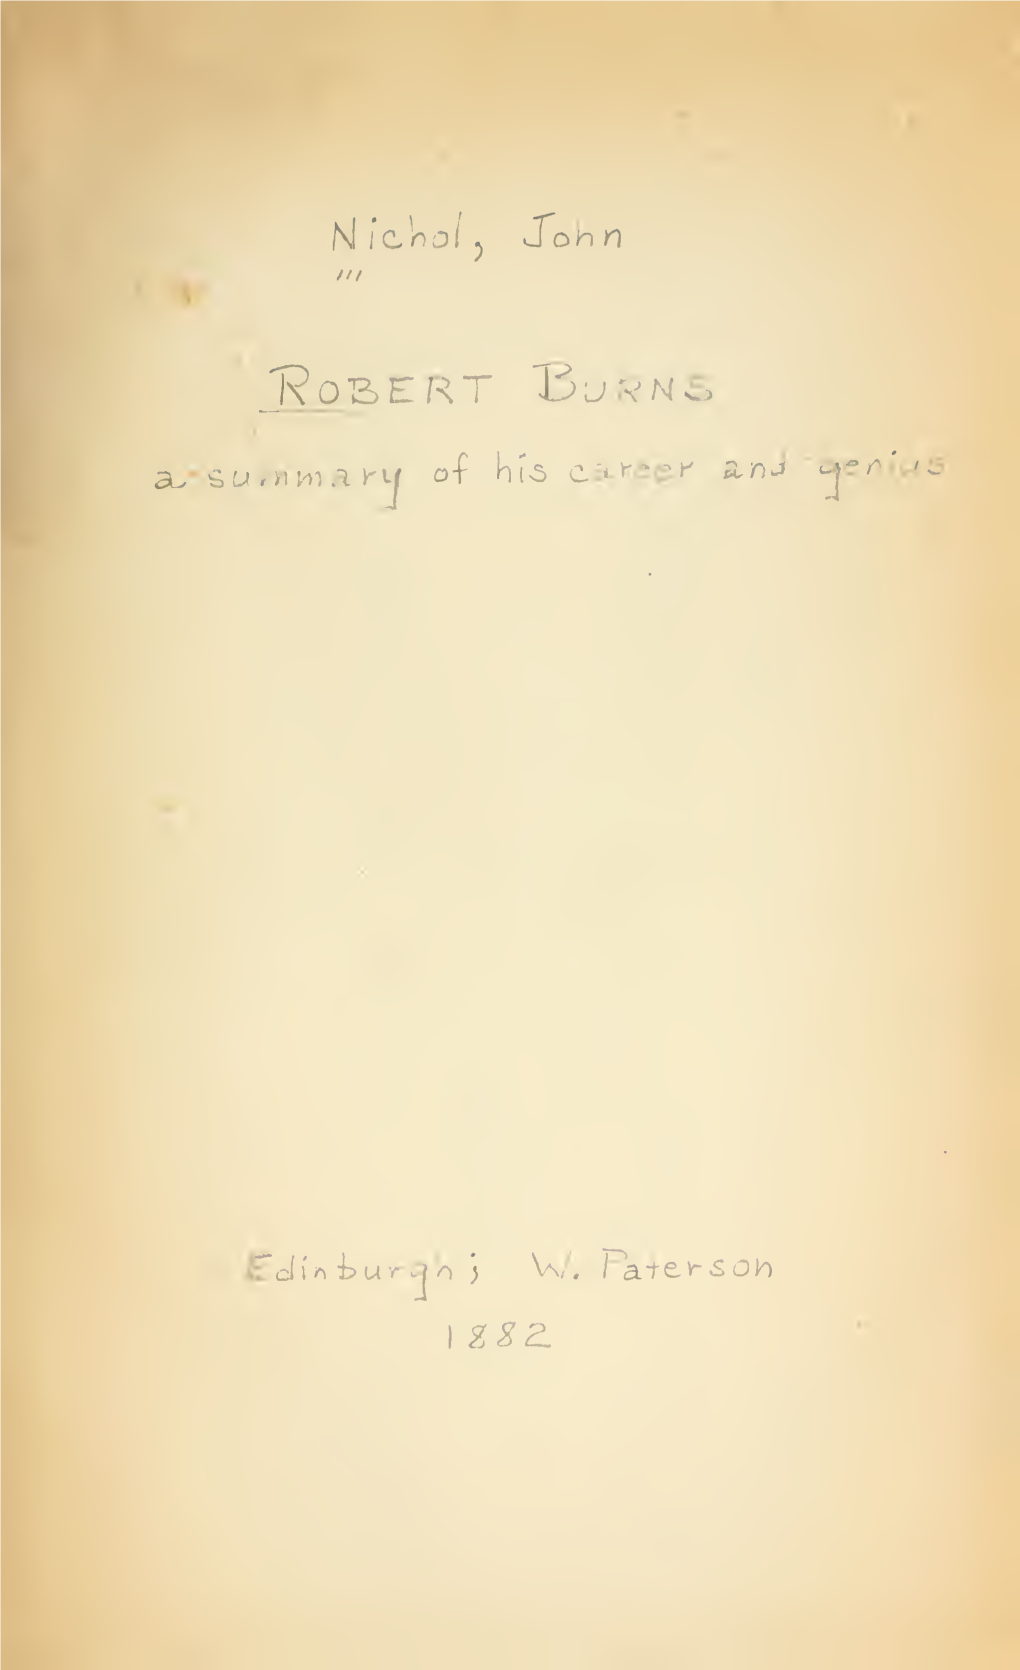 Robert Burns, a Summary of His Career and Genius